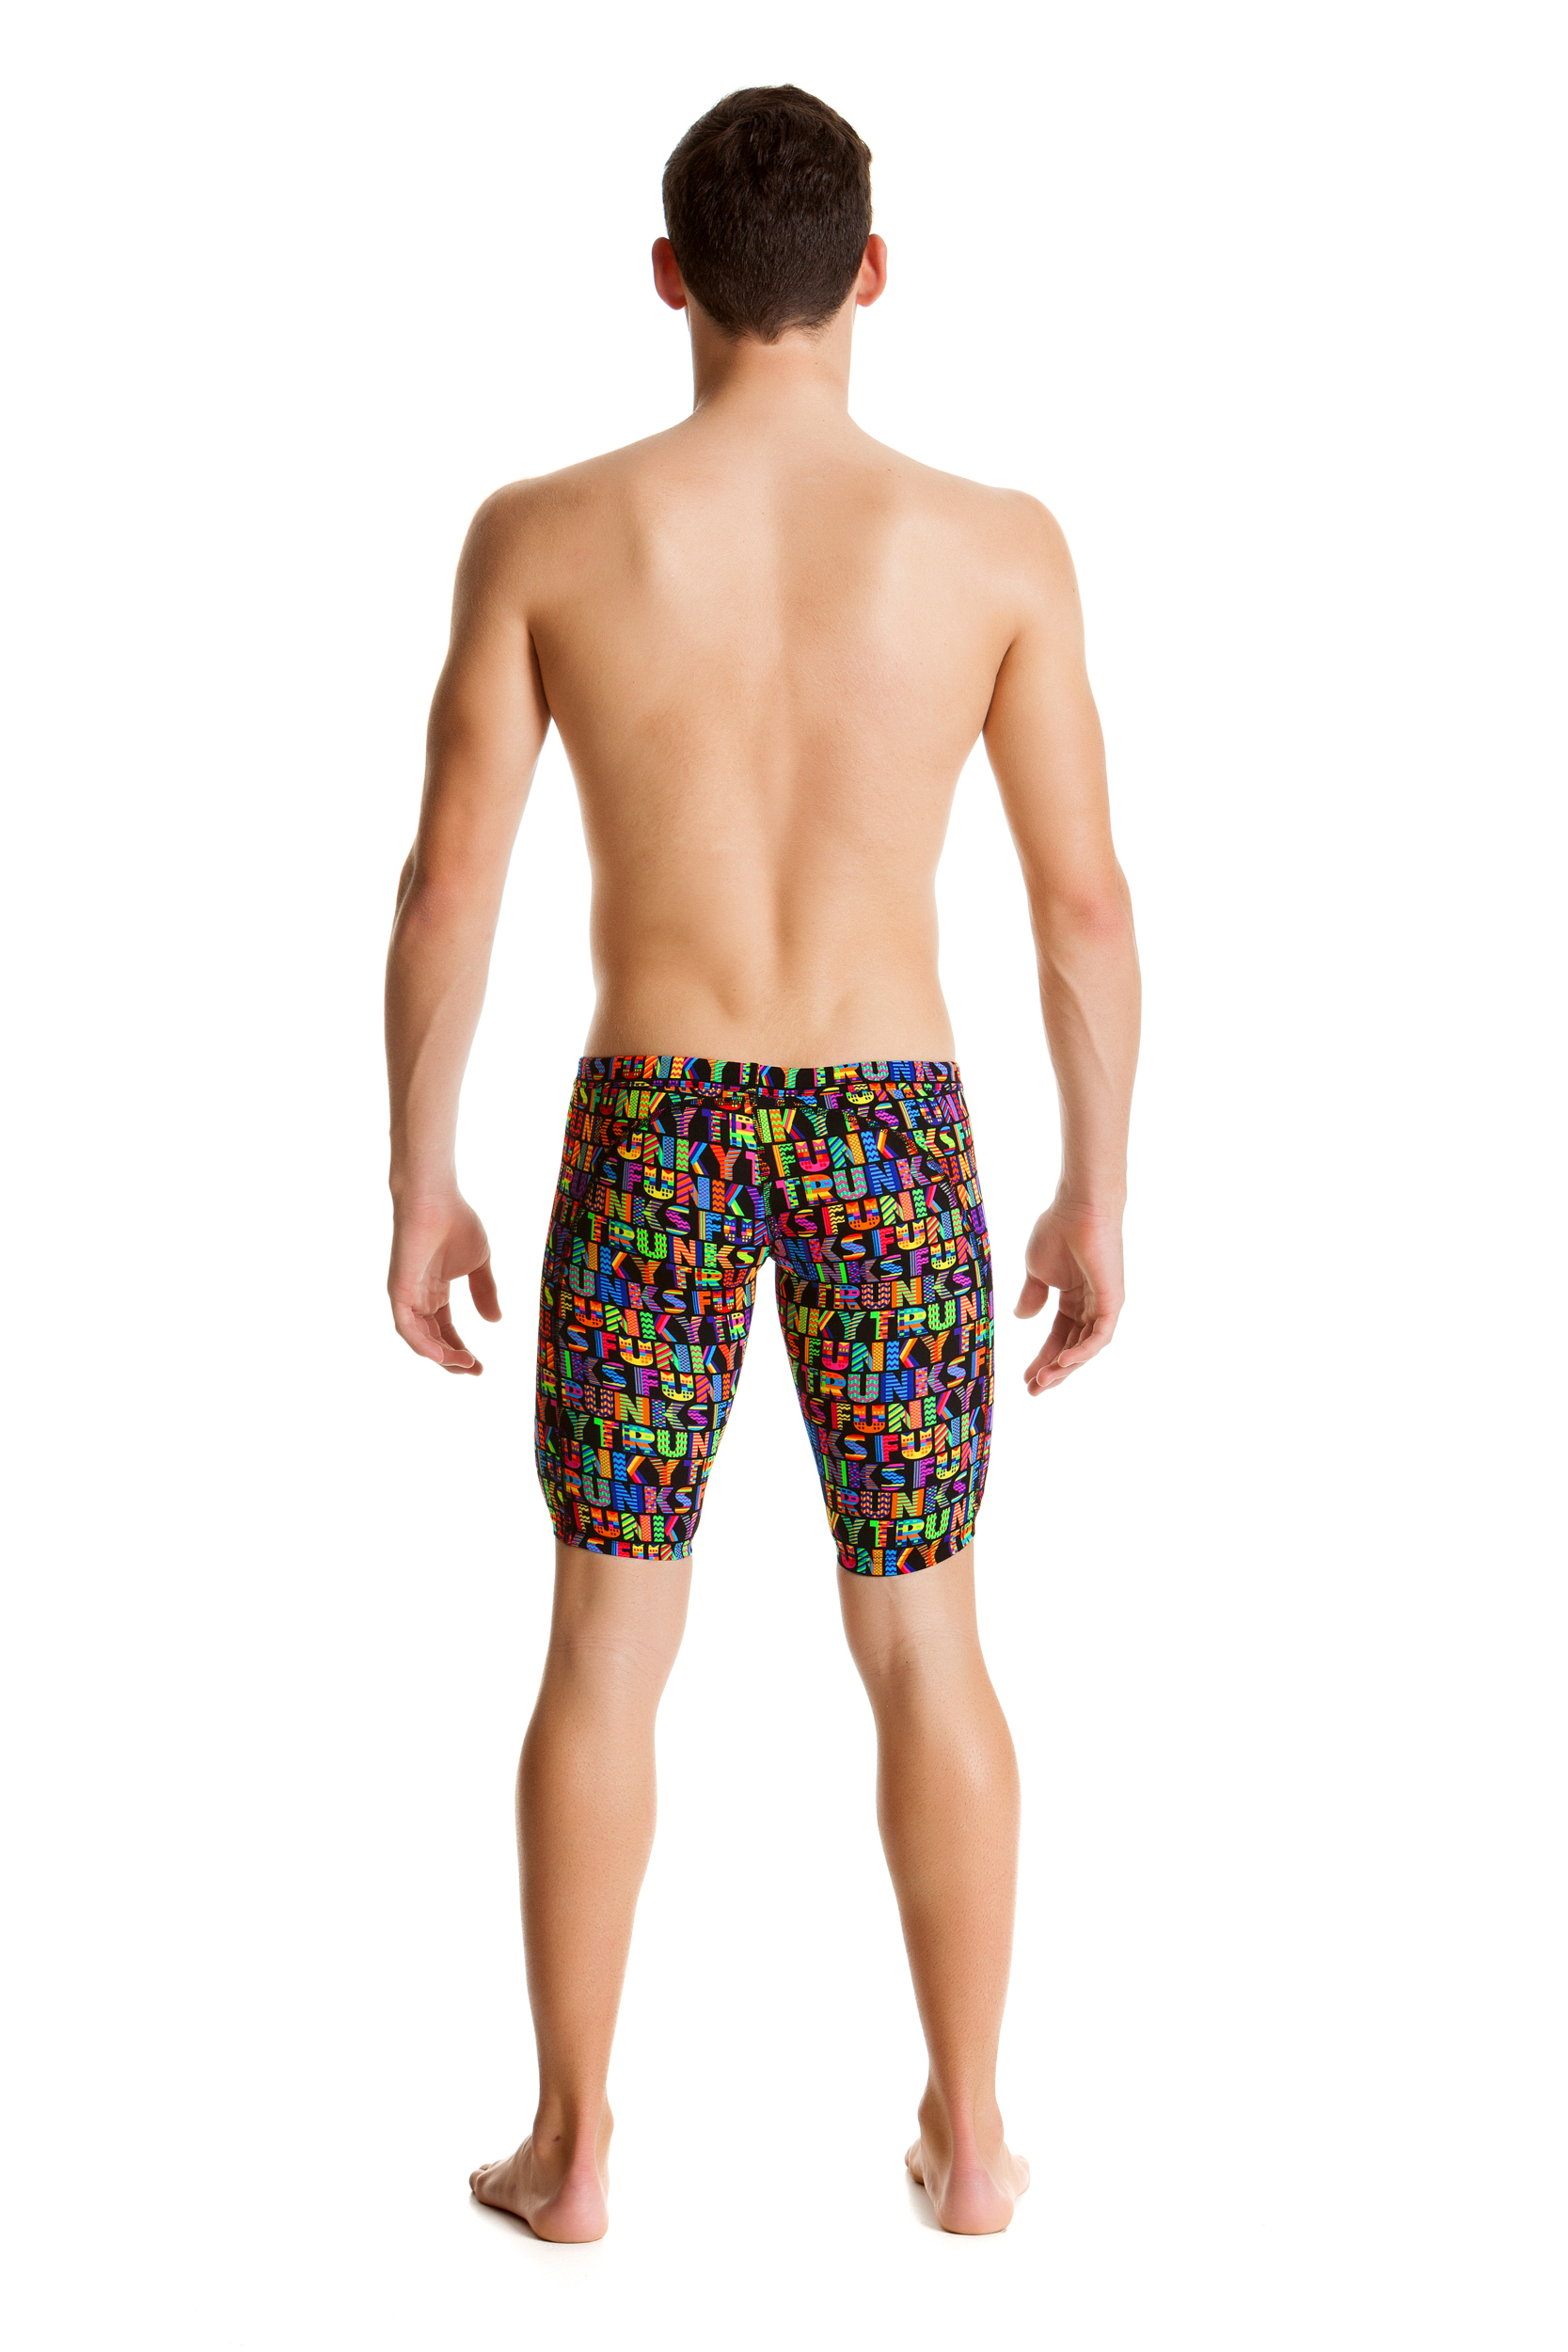 Download Funky Trunks Mens Training Jammers Trunked Up | Dolphin ...